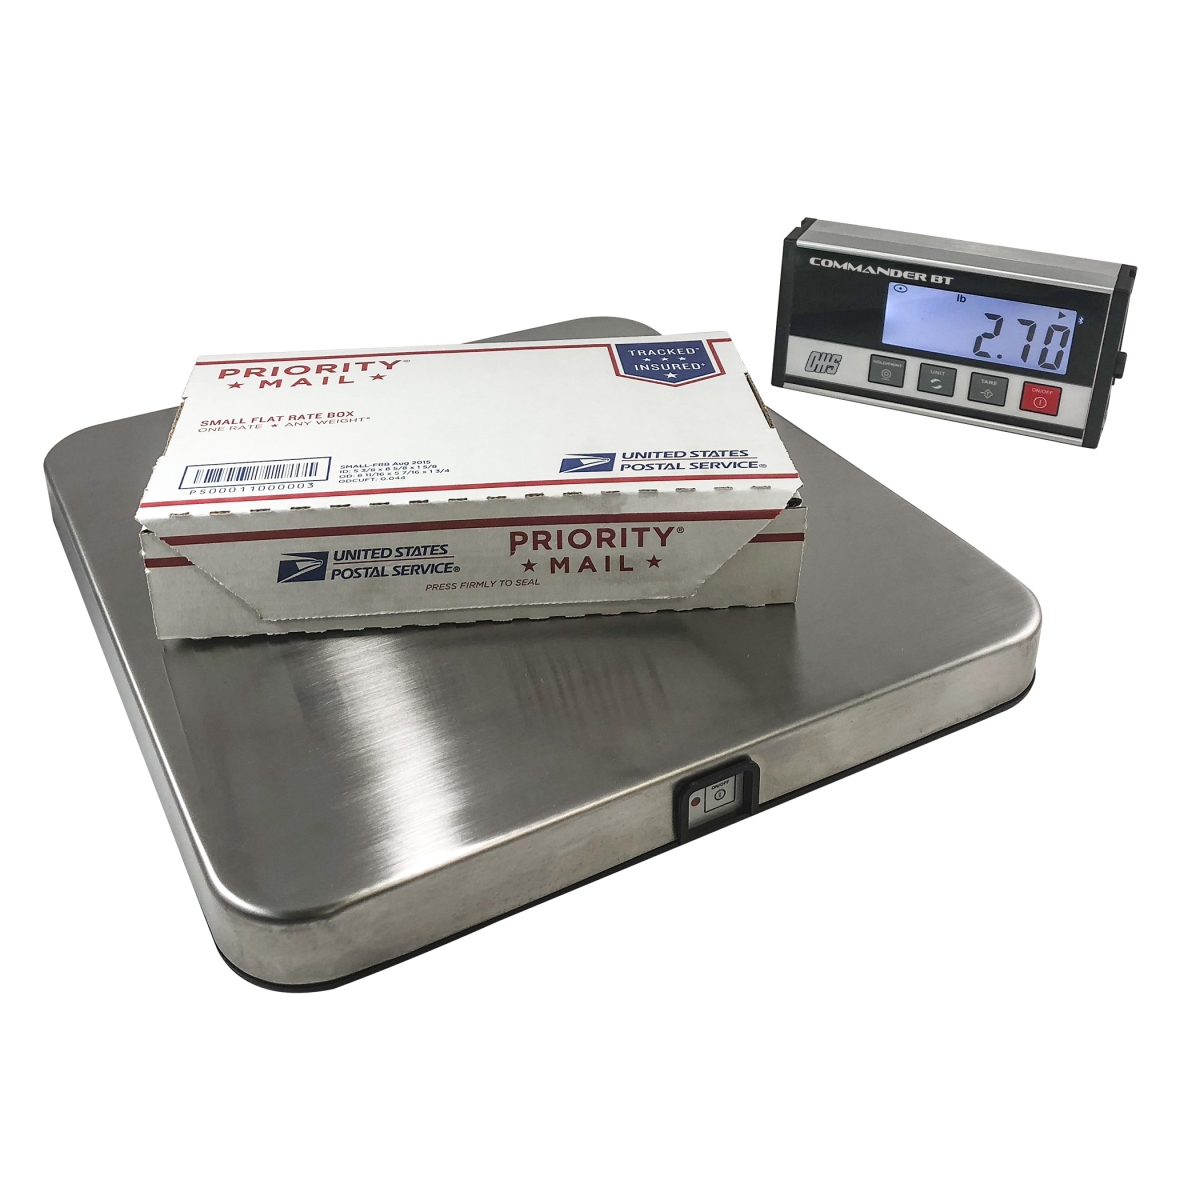 Optima Home Scales Cmd-330-bt Commander Stainless Steel Shipping Platform Scale With Bluetooth Indicator